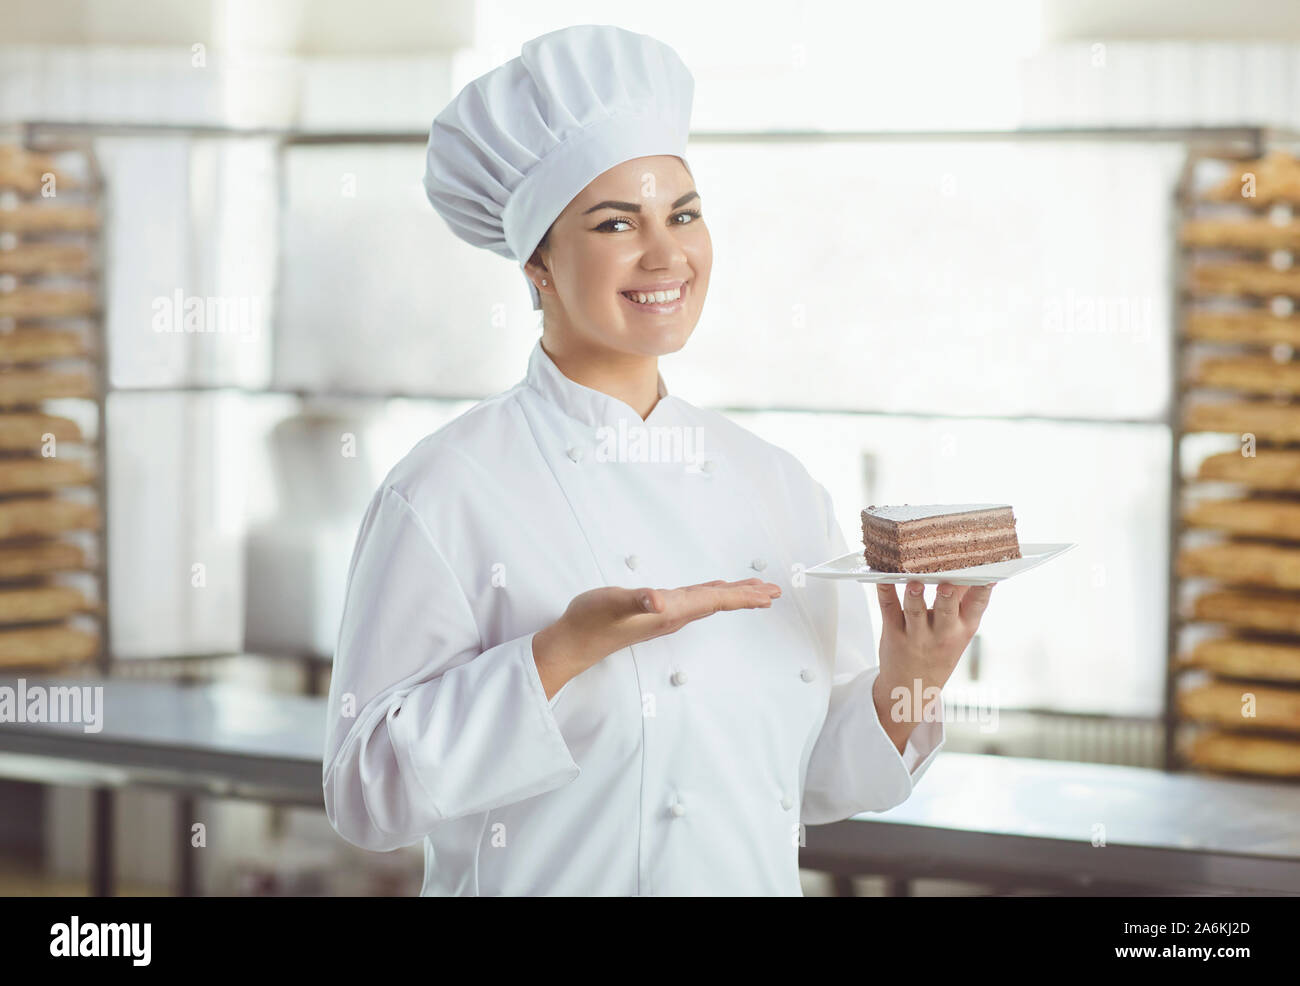 Pastry chef with pastry cake in hands at the bakery. Stock Photo